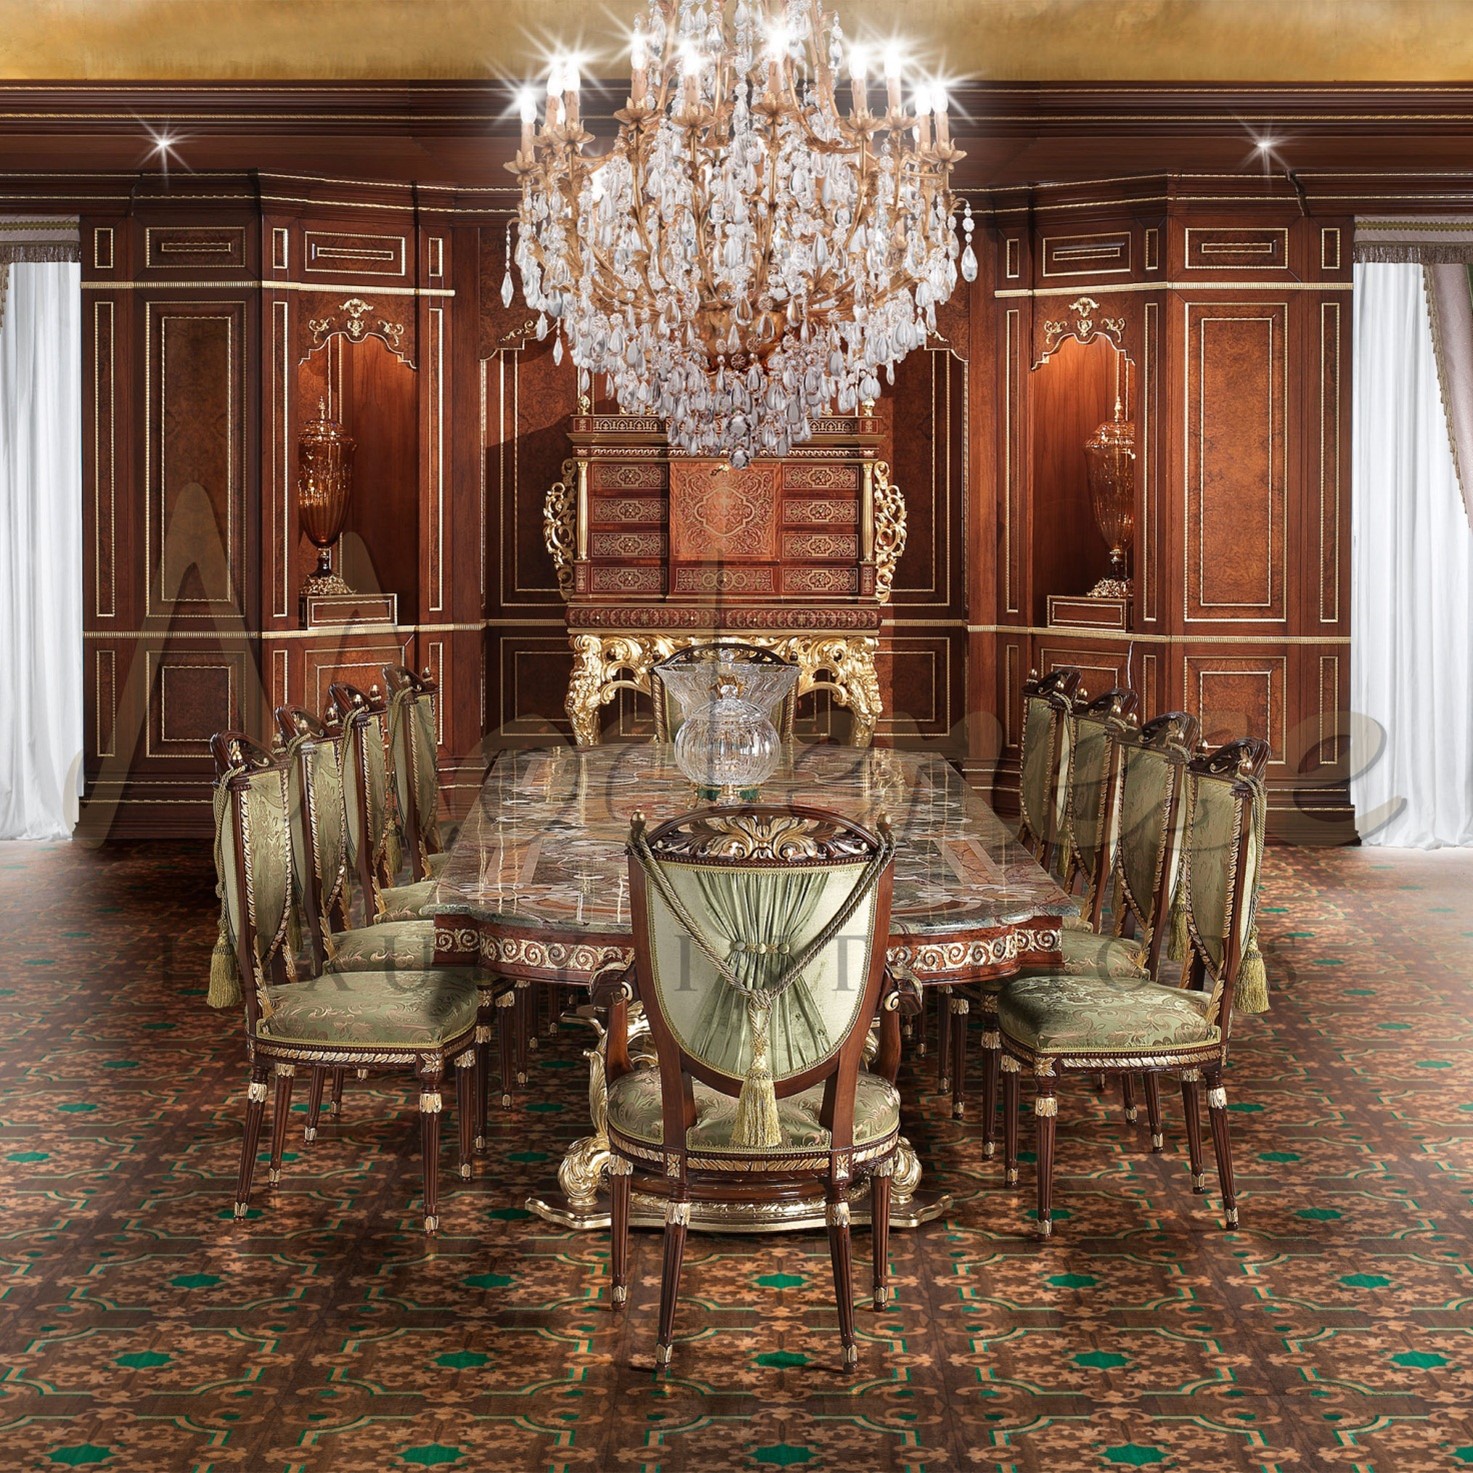 HOW TO CREATE A GENUINE ROYAL DINING ROOM